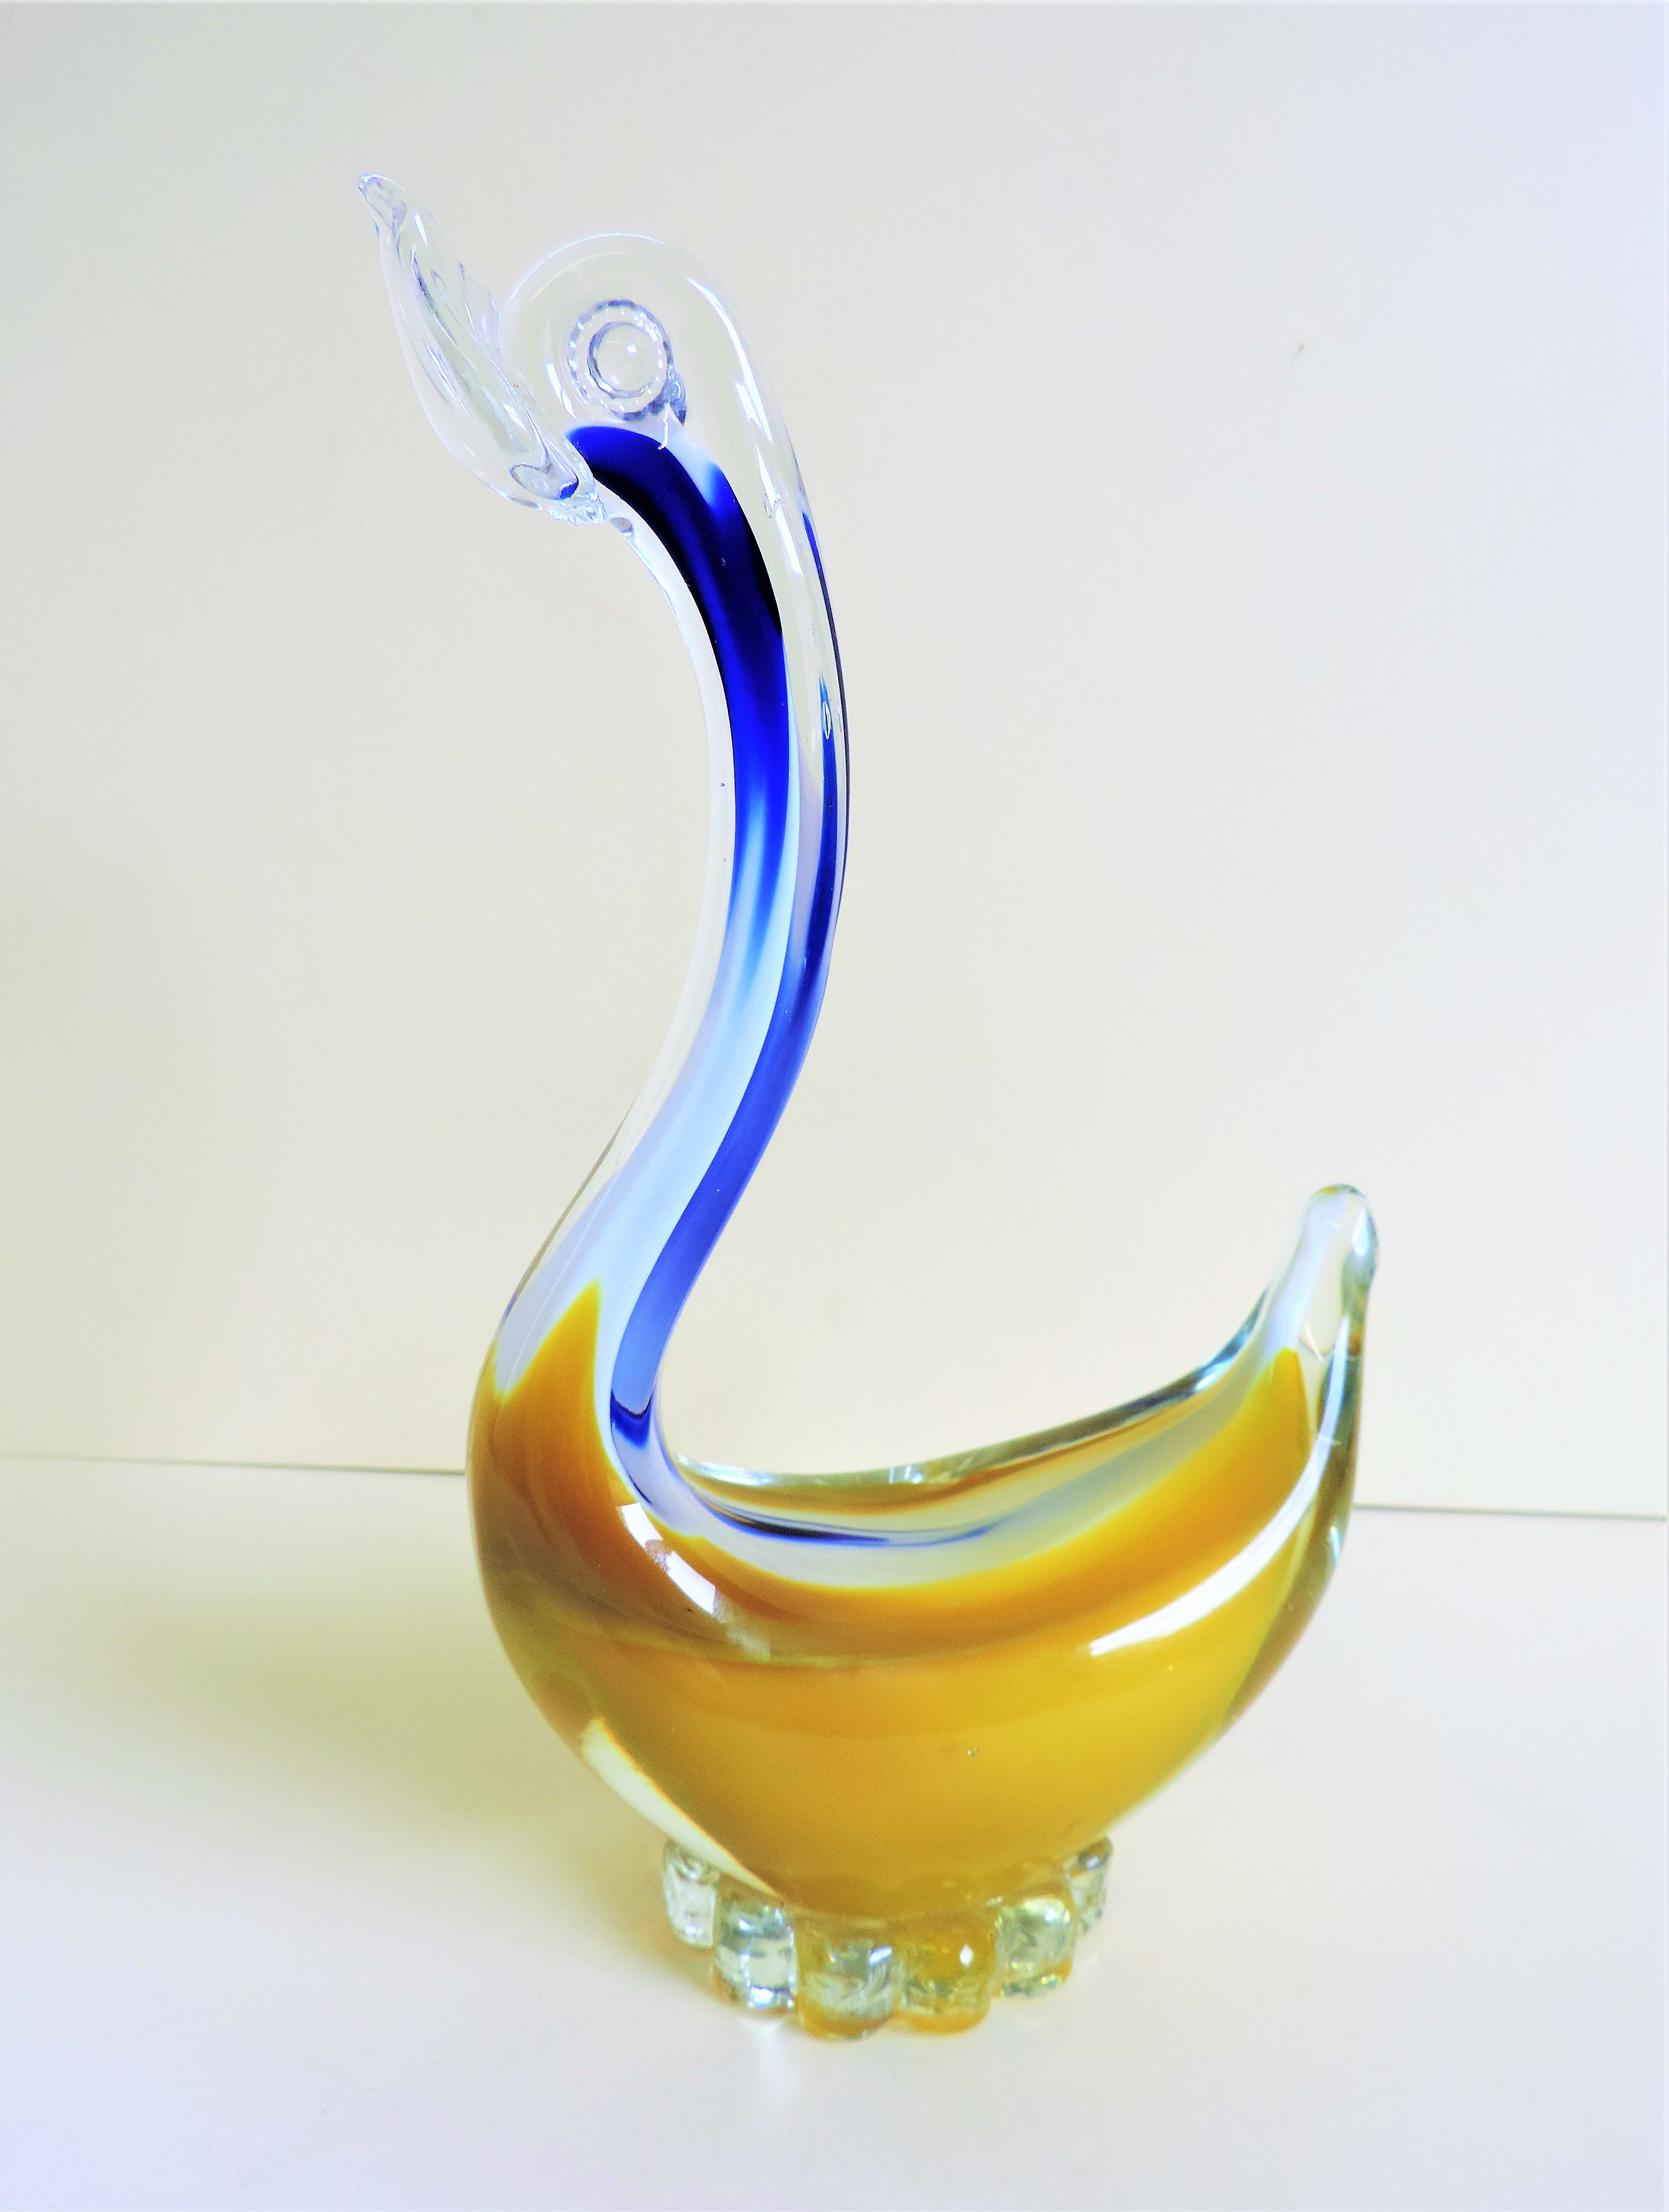 Vintage Murano Sommerso Glass Sculpture - Image 3 of 3